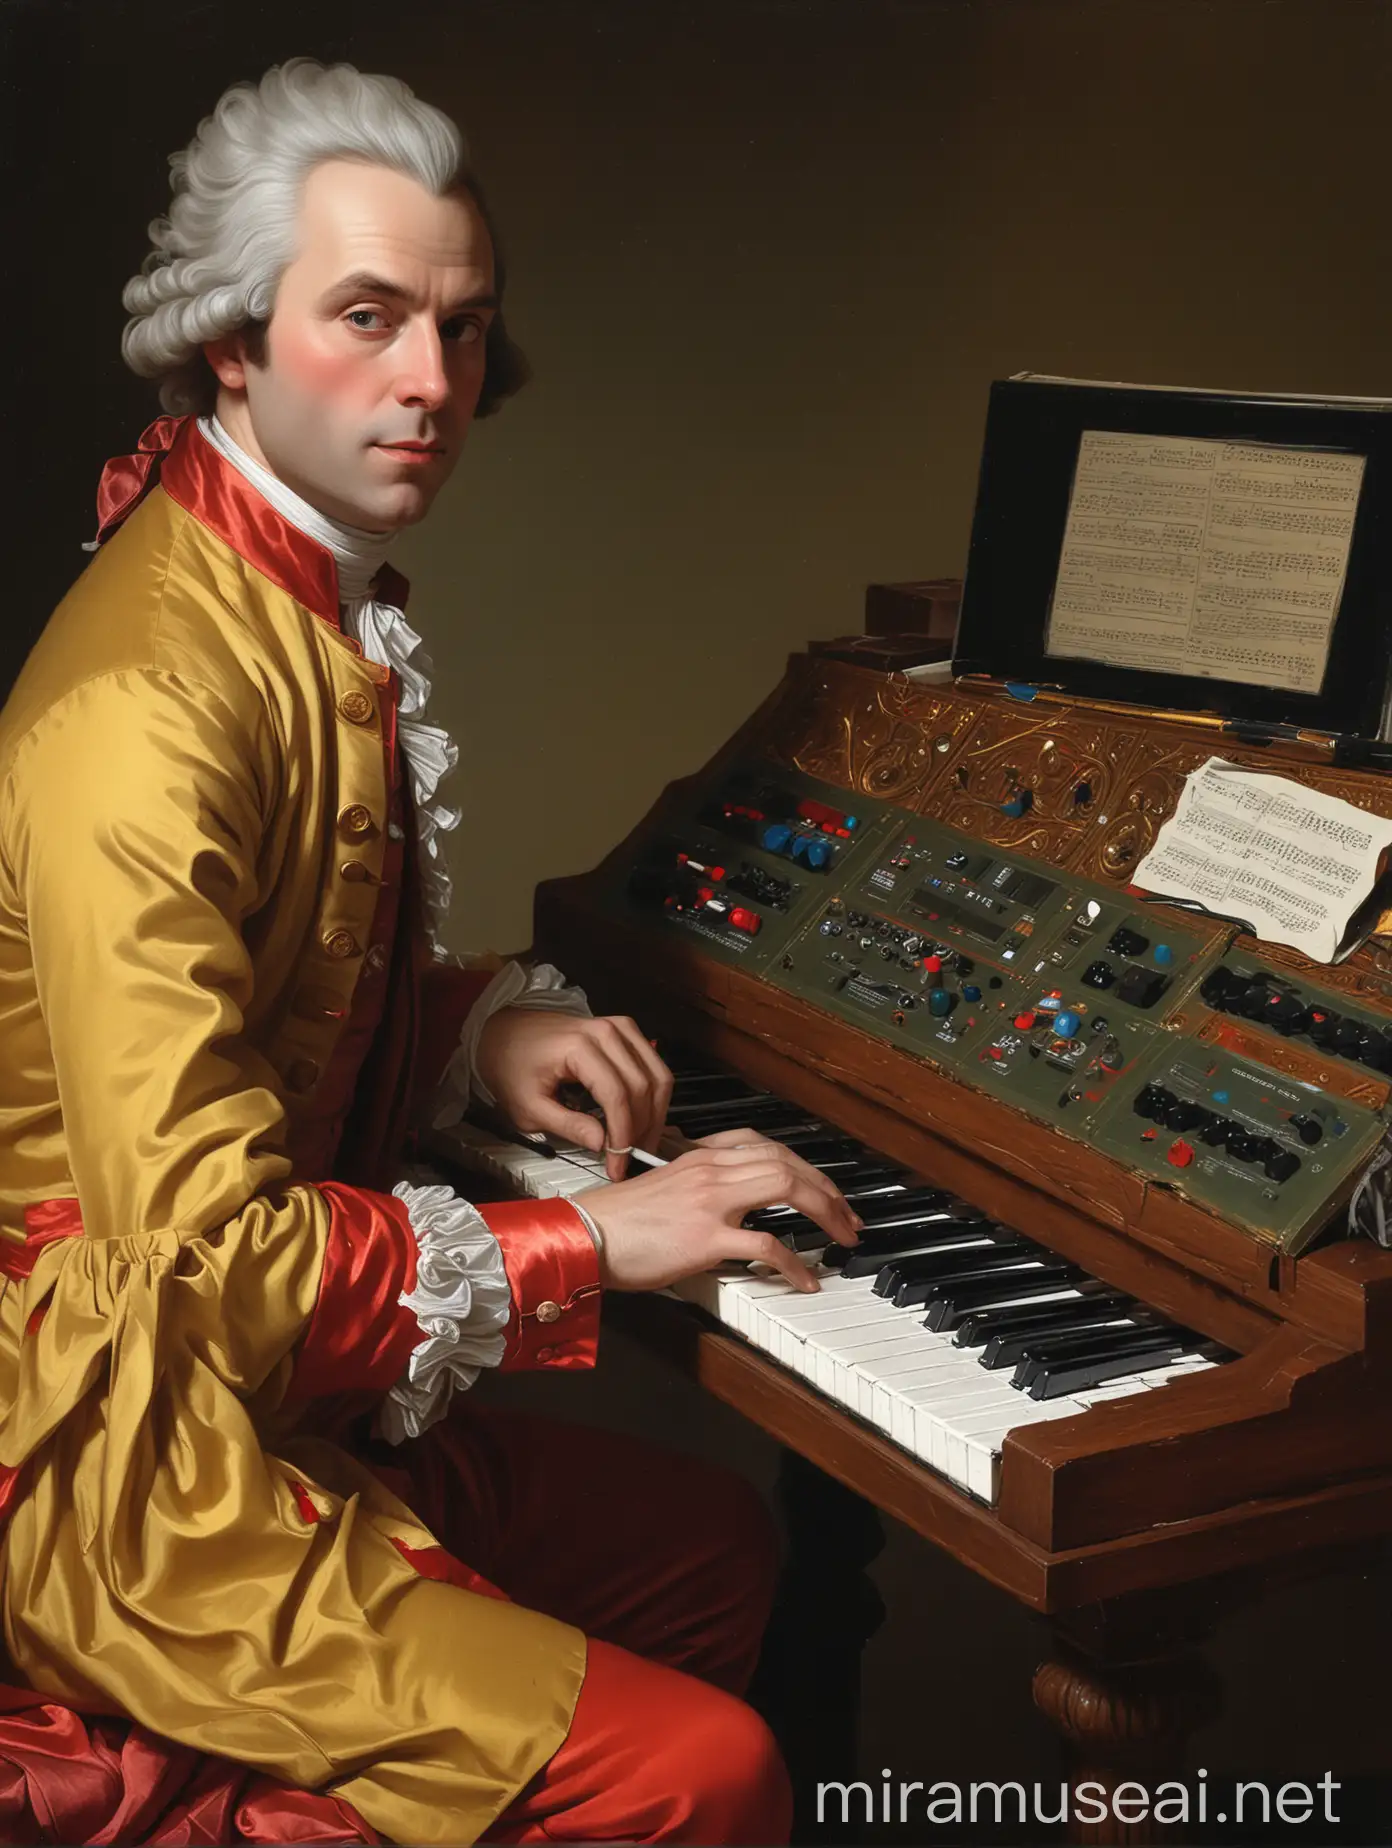 Highly detailed painting closely based on (("Henry Laurens" by John Singleton Copley)), on the table is a ((synthesizer keyboard and a laptop computer)), ((avoid uneven keys)), leave blank space at top, use muted colors only, high quality